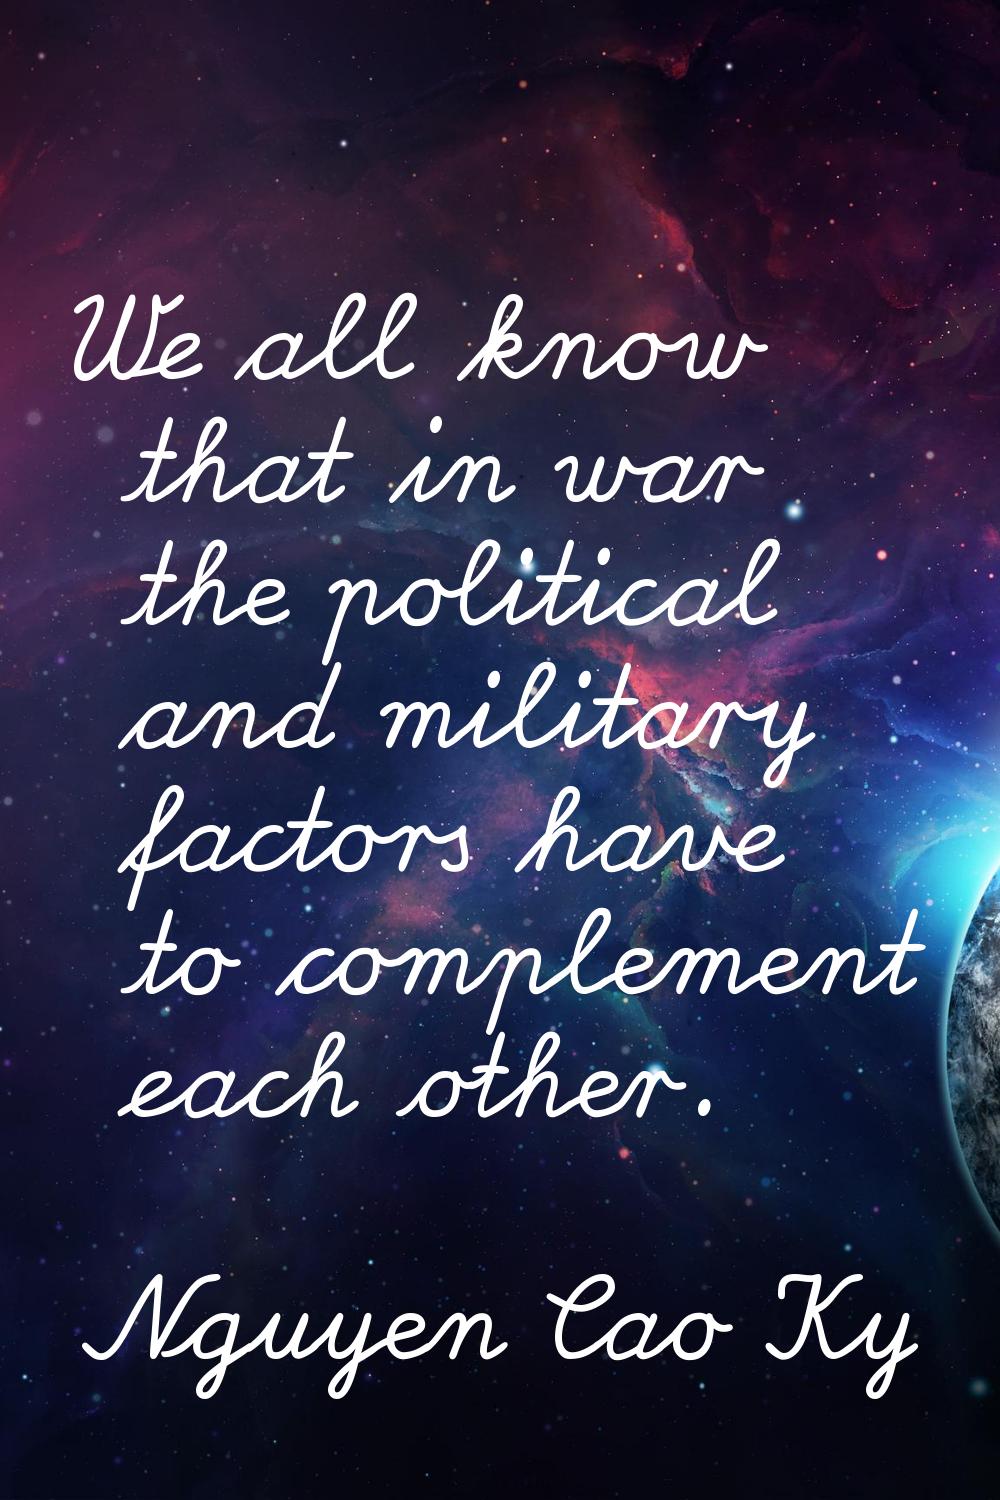 We all know that in war the political and military factors have to complement each other.